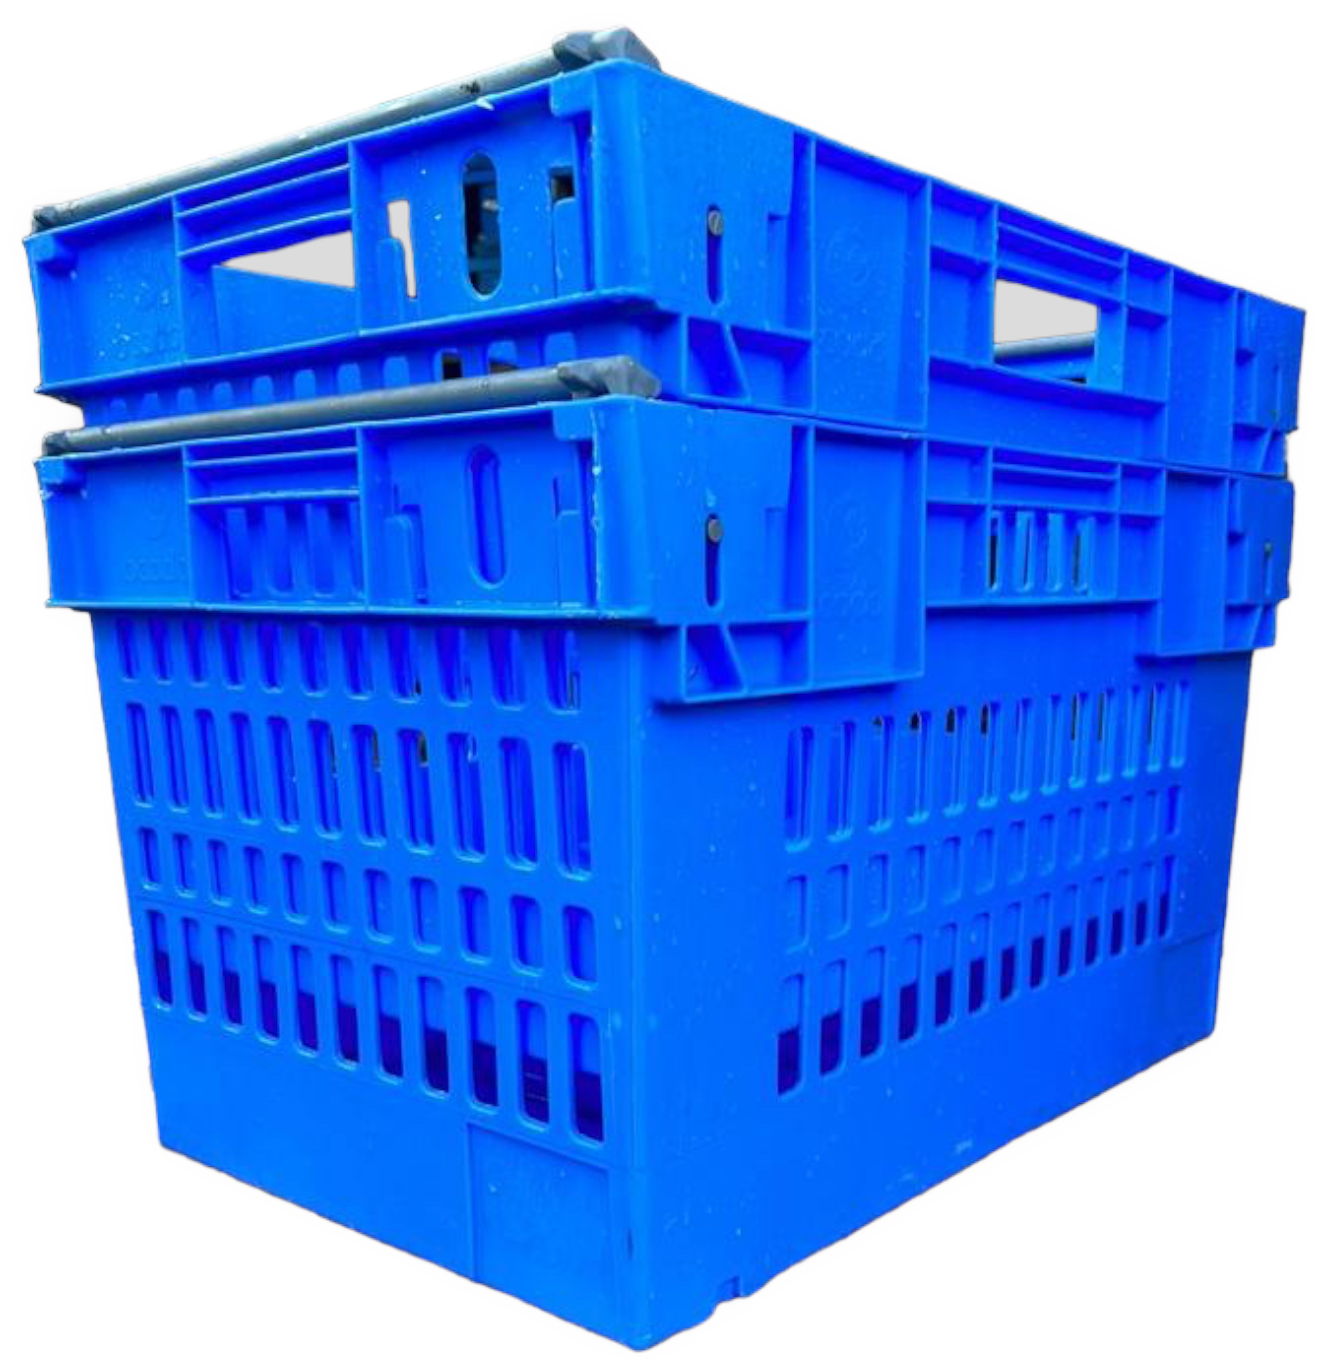 400x300x185 Bale Arm Crate Black 15LTR - Pack of 14 For Agricultural Industry